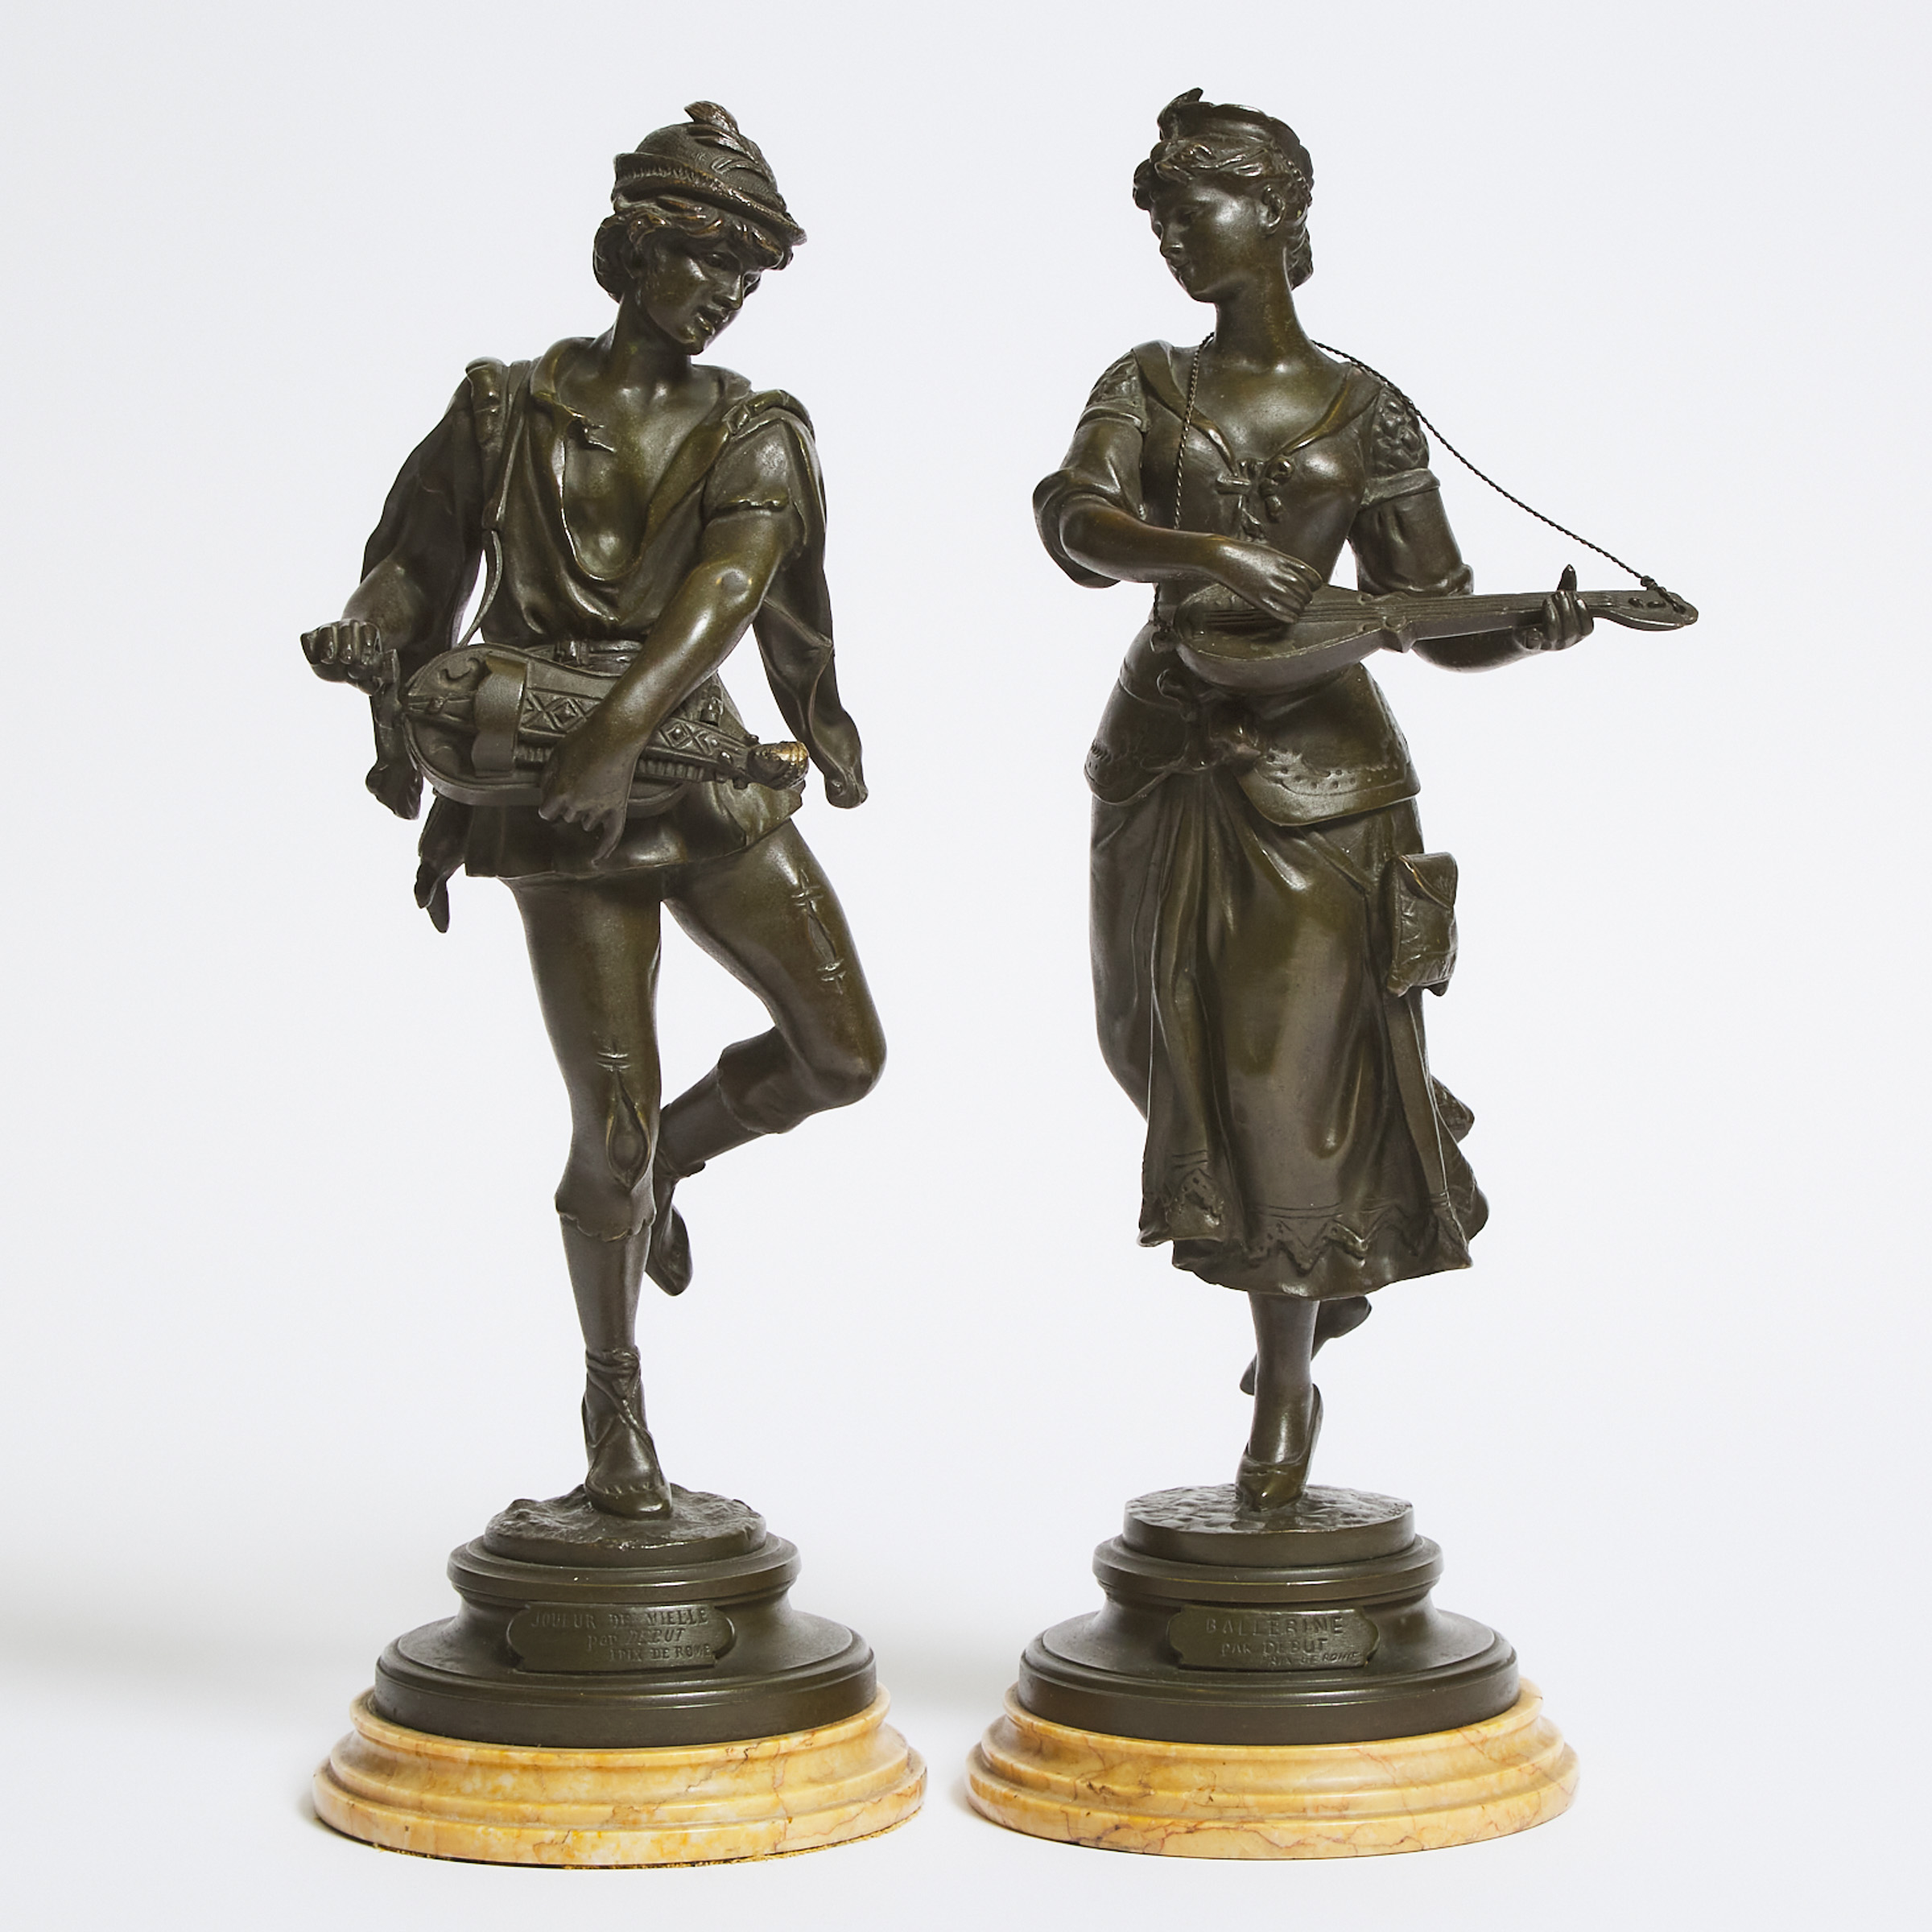 Pair of French Patinated Bronze Figures of Musicians, after Jean Didier Début (French, 1824-1893)